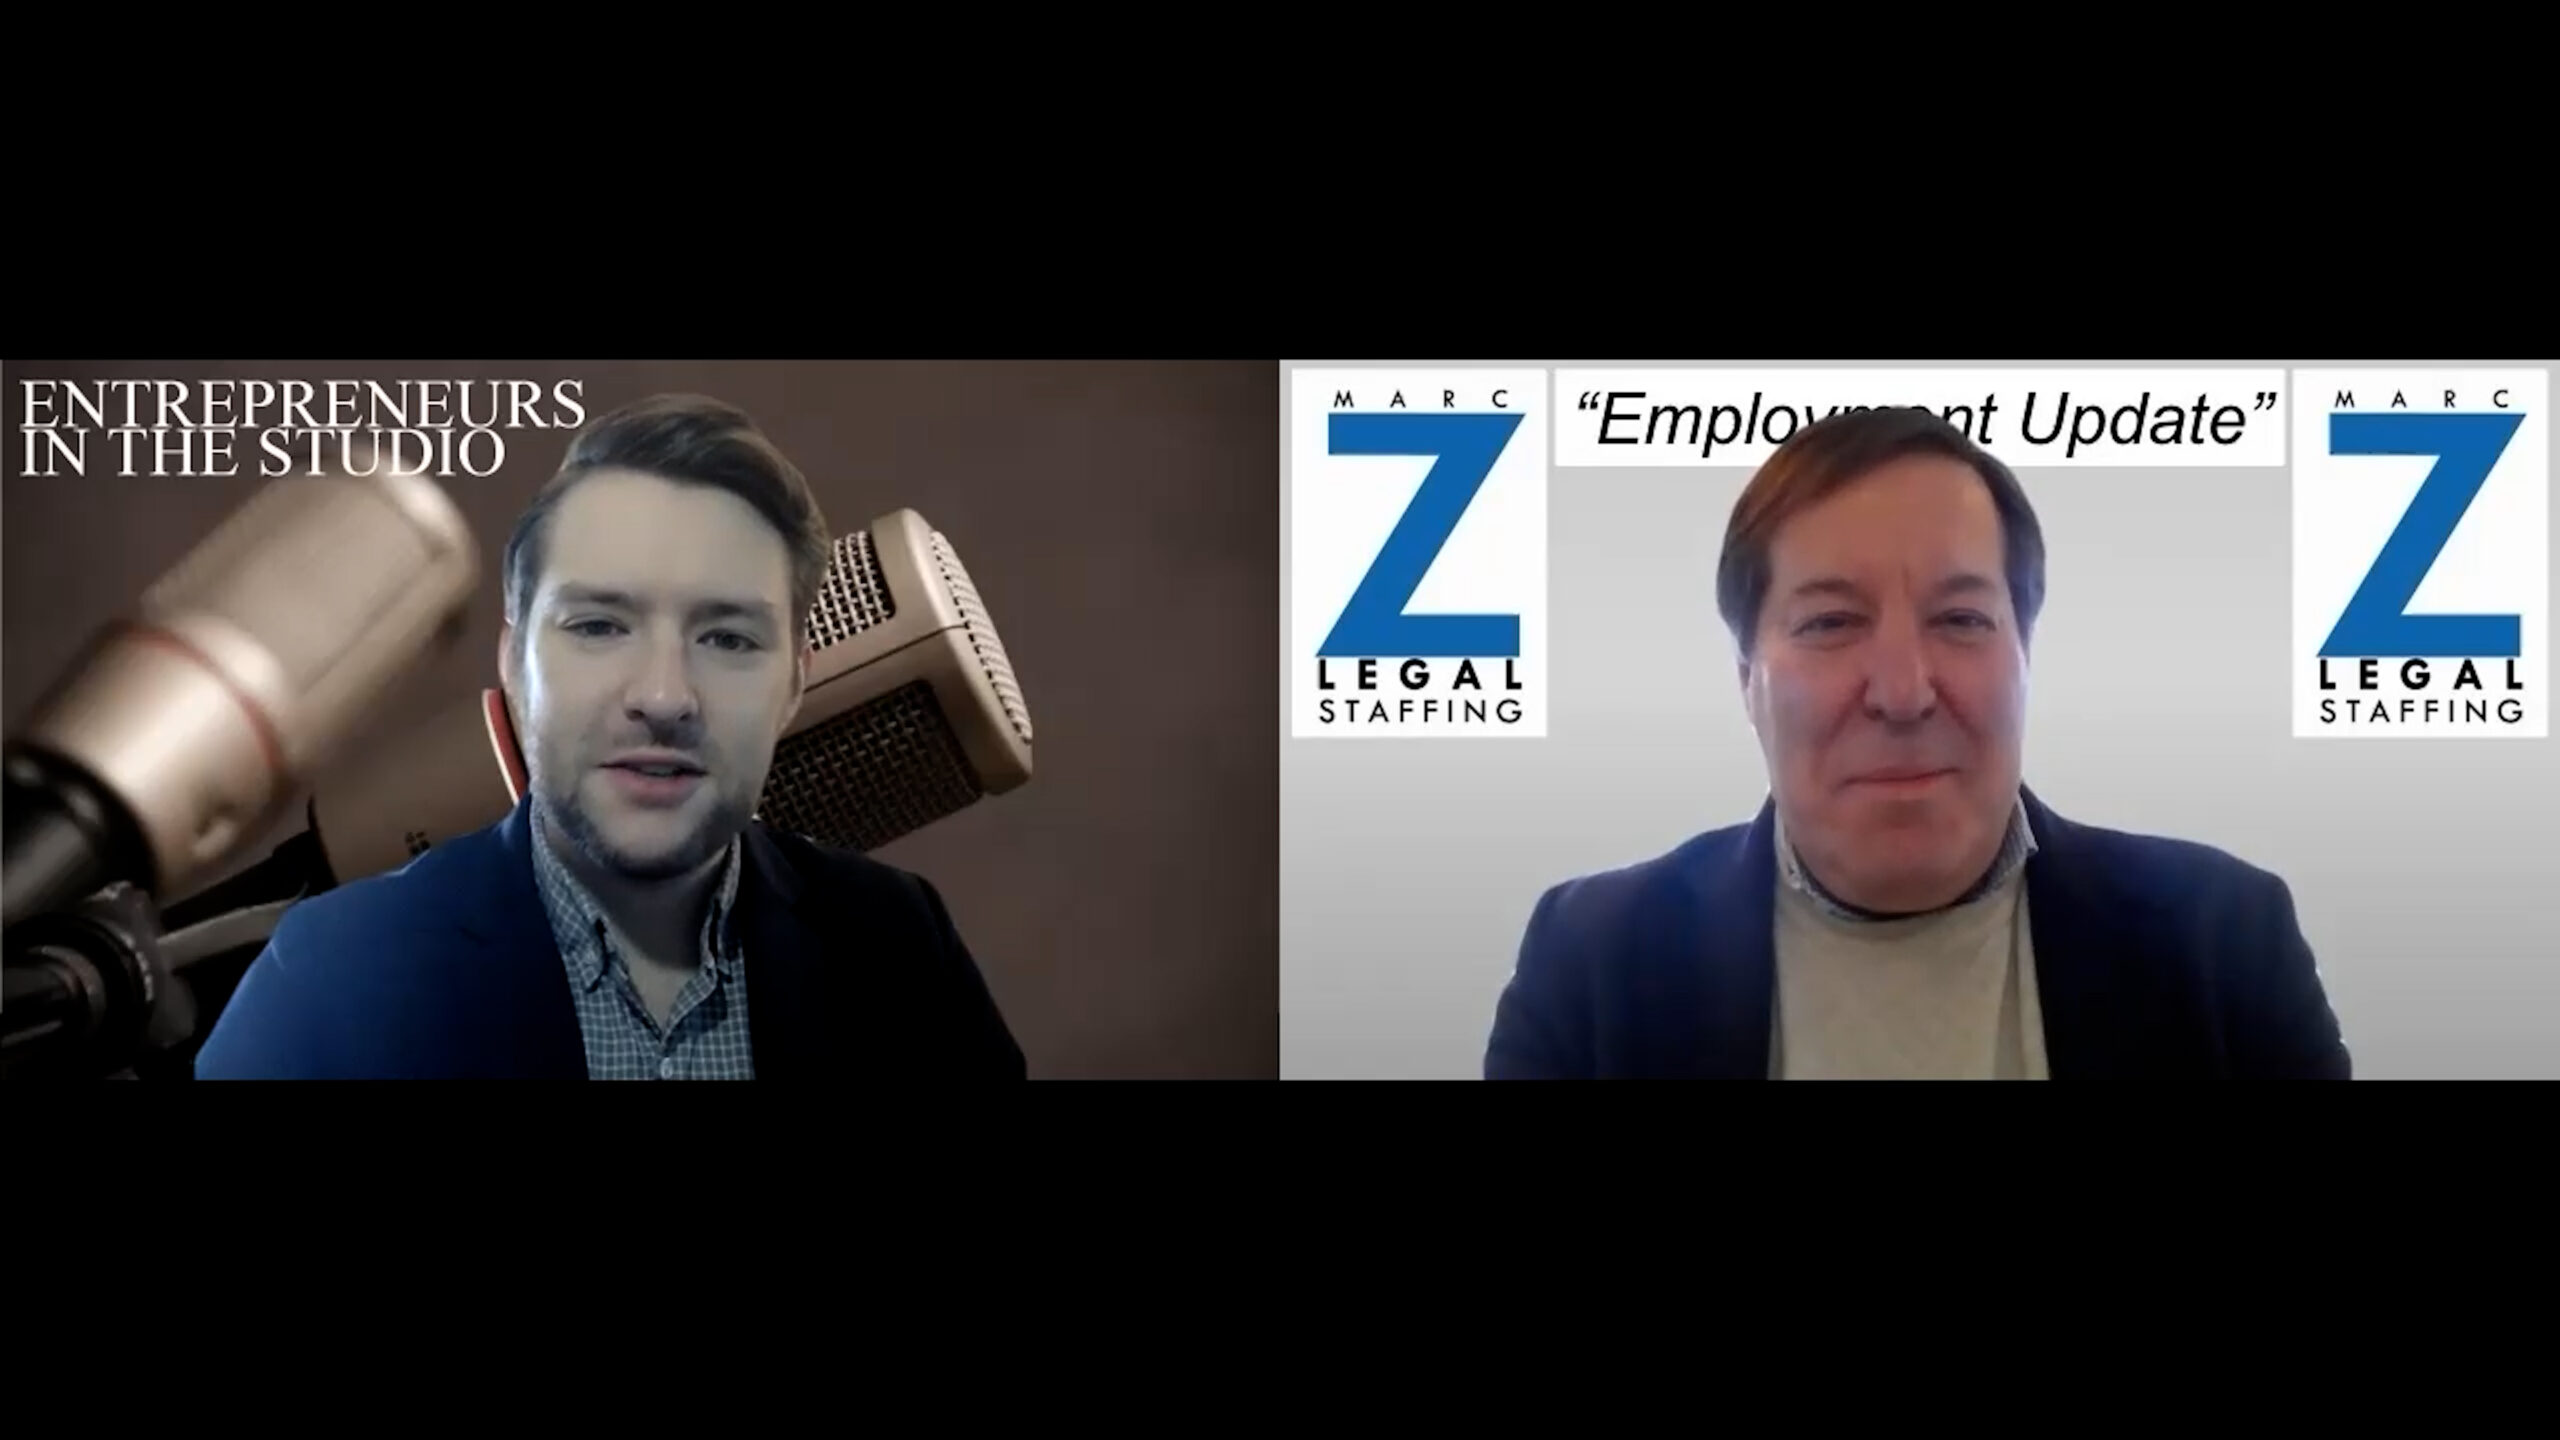 “How To Keep Your New Hires” with Marc Zwetchkenbaum of Marc Z Legal Staffing